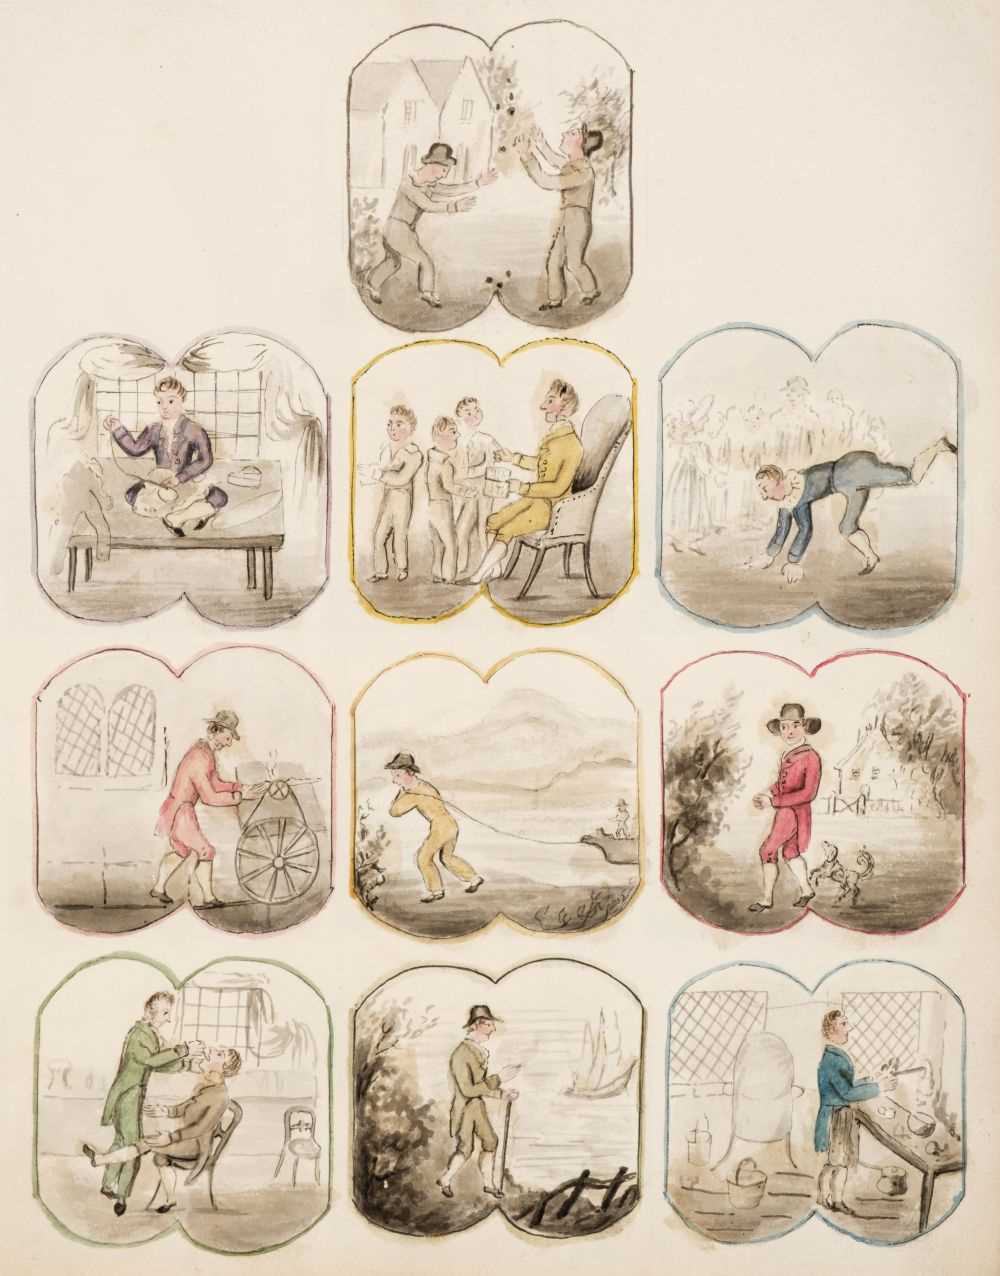 Lot 475 - Trades & Pastimes. A collection of leaves with hand-drawn illustrations, circa 1832